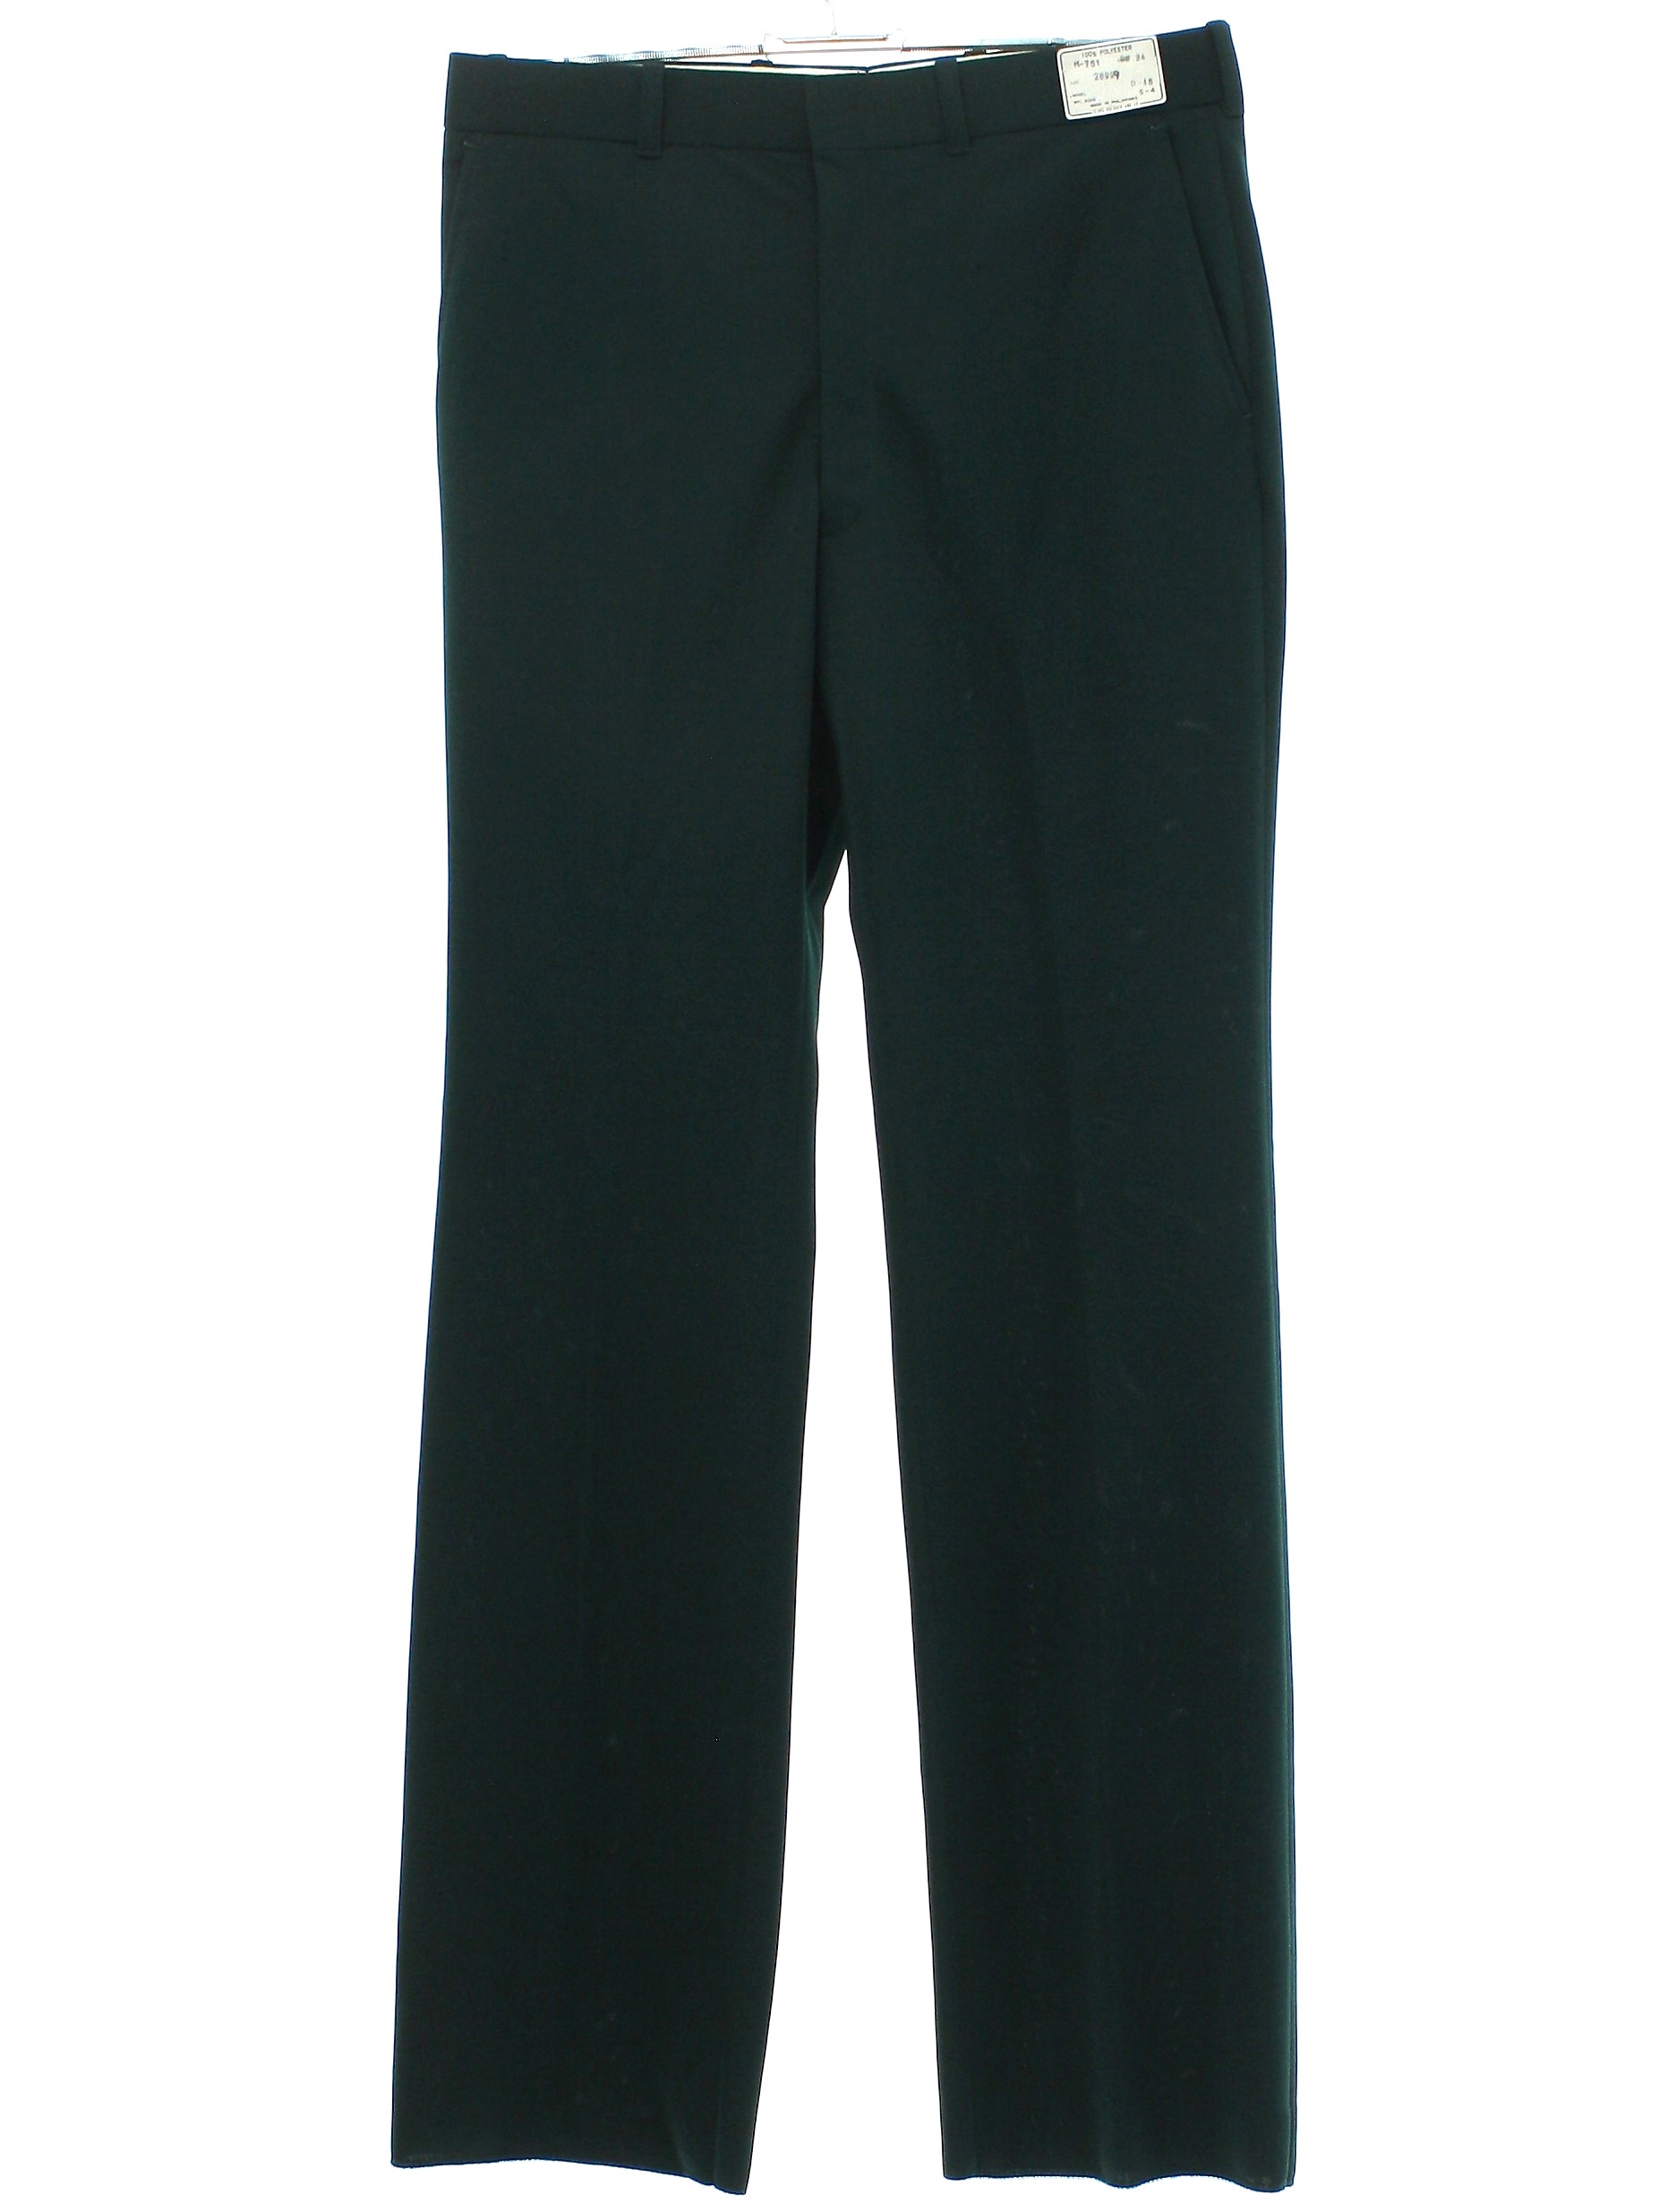 Retro 70's Pants: Late 70s -Sears Roebuck and Co.- Mens forest green ...